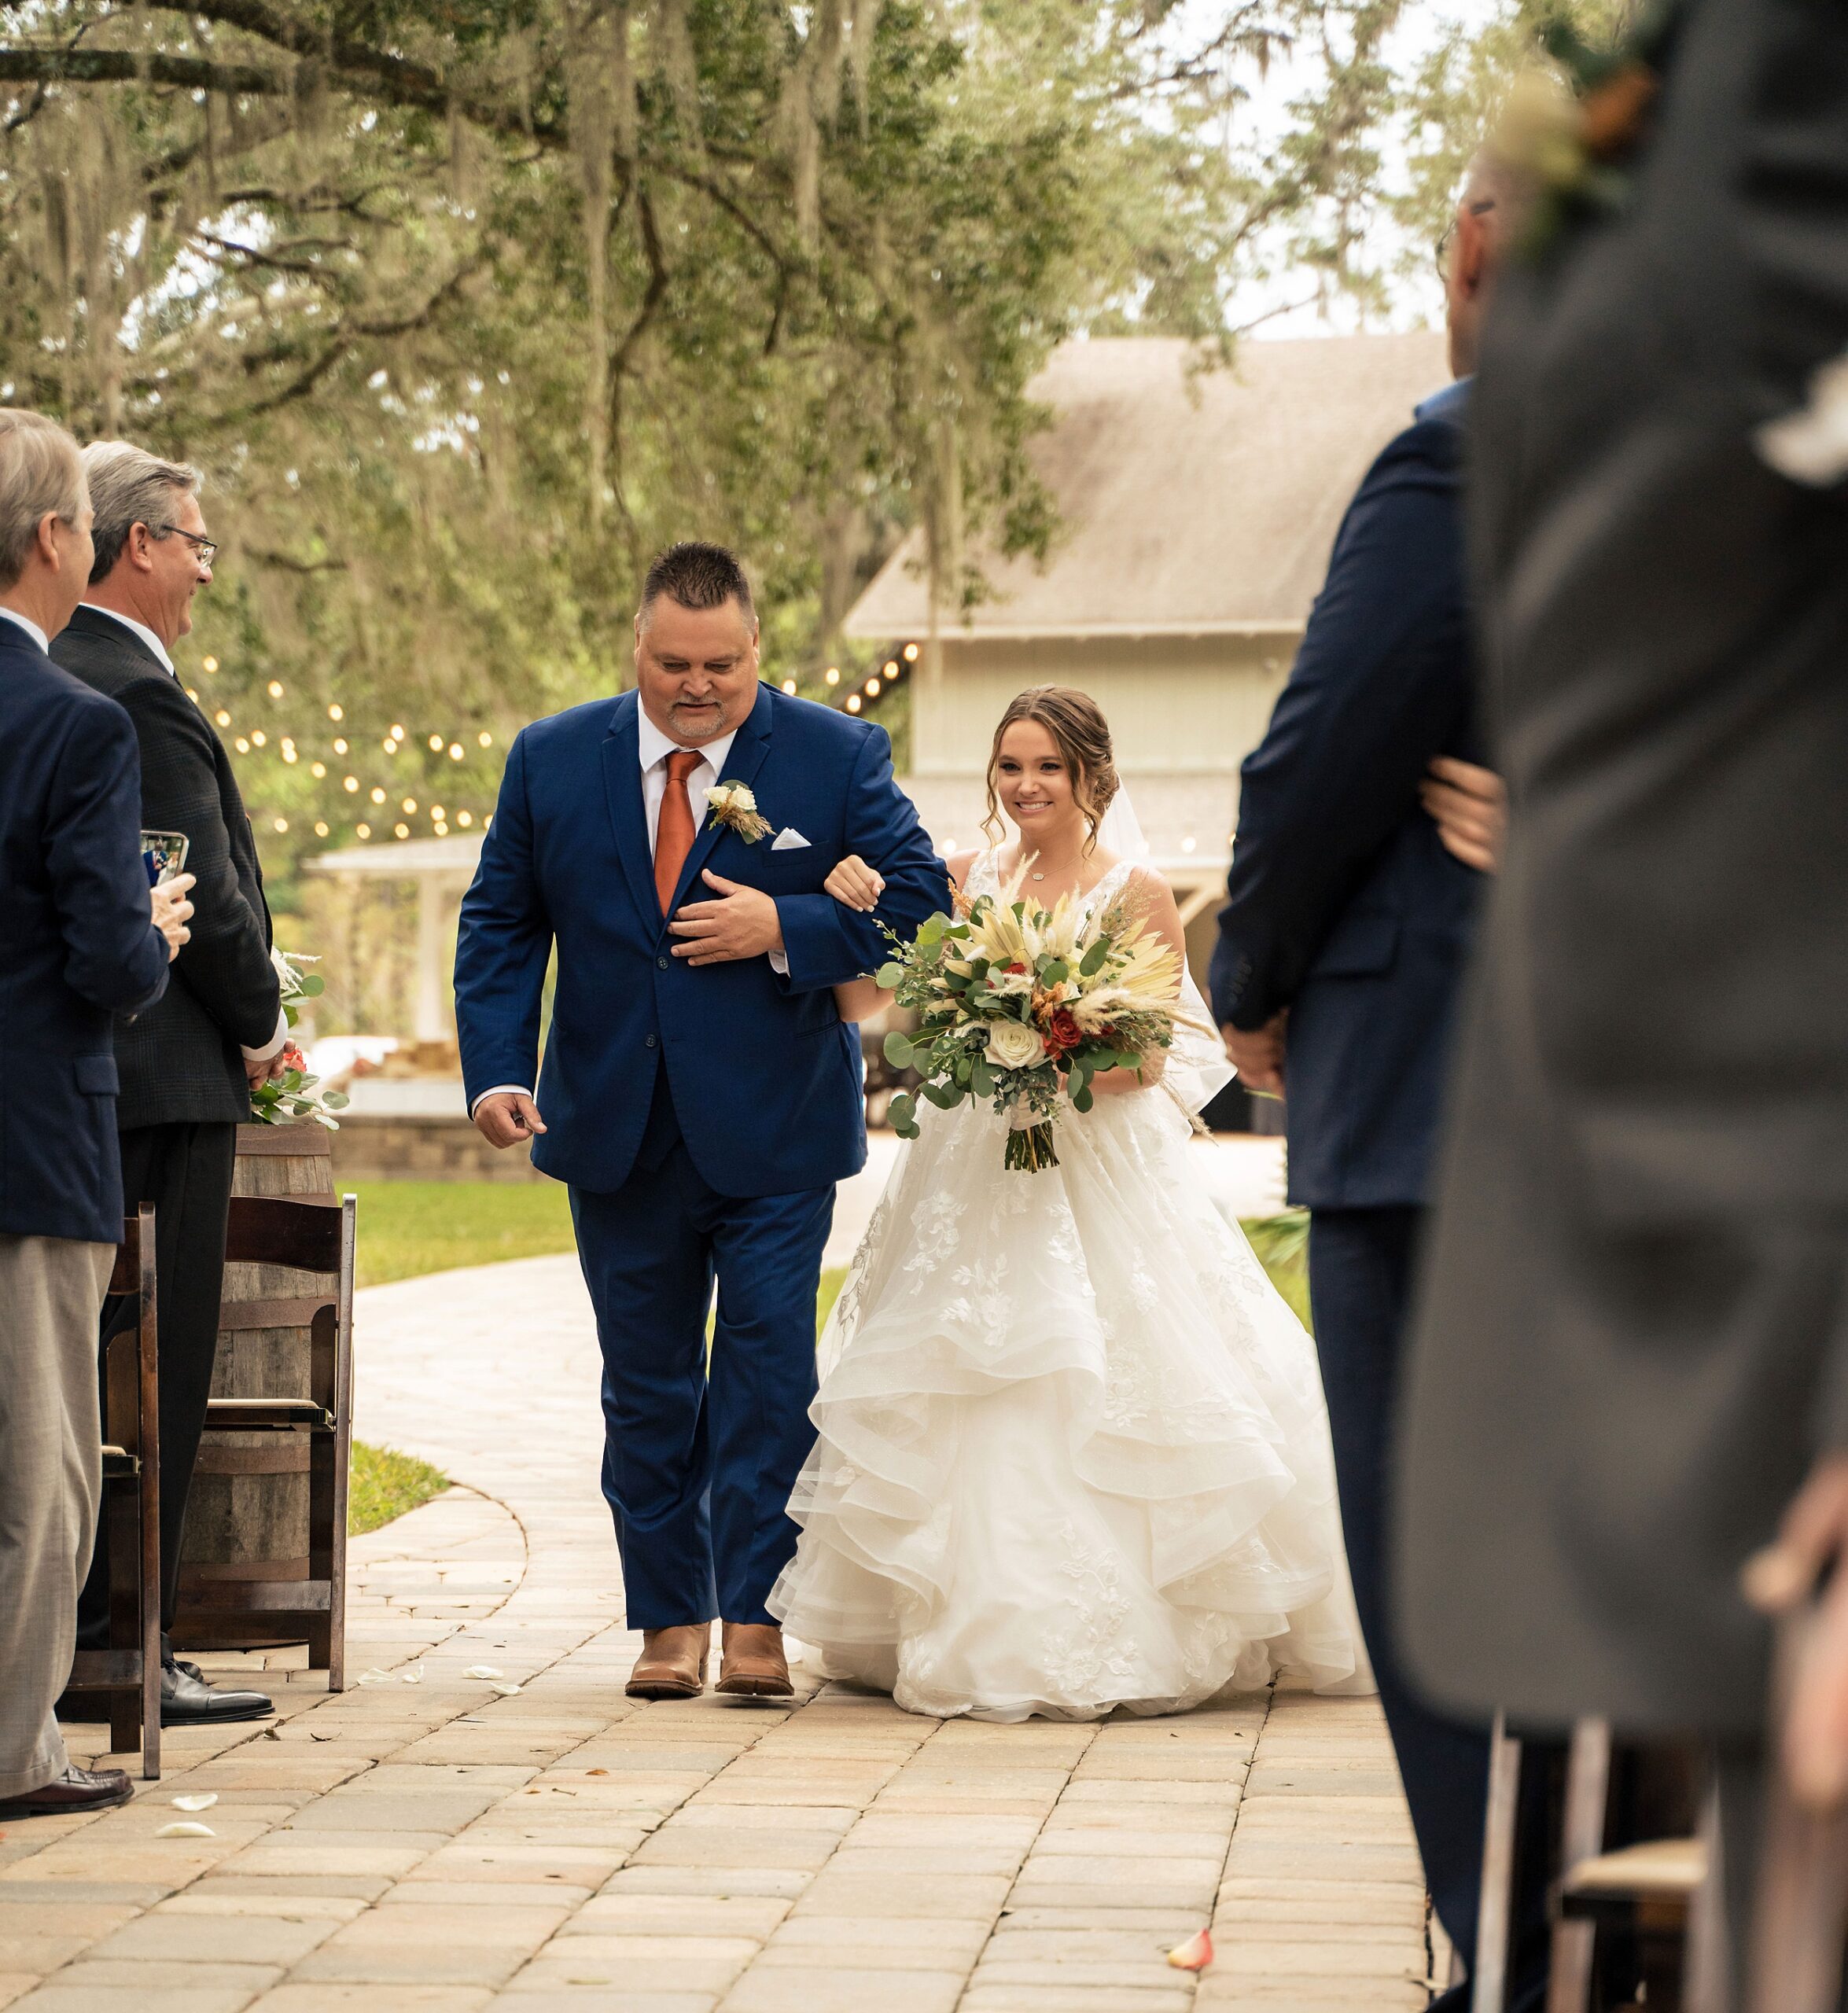 A father in a blue suit walks his daughter down the aisle of her outdoor patio wedding